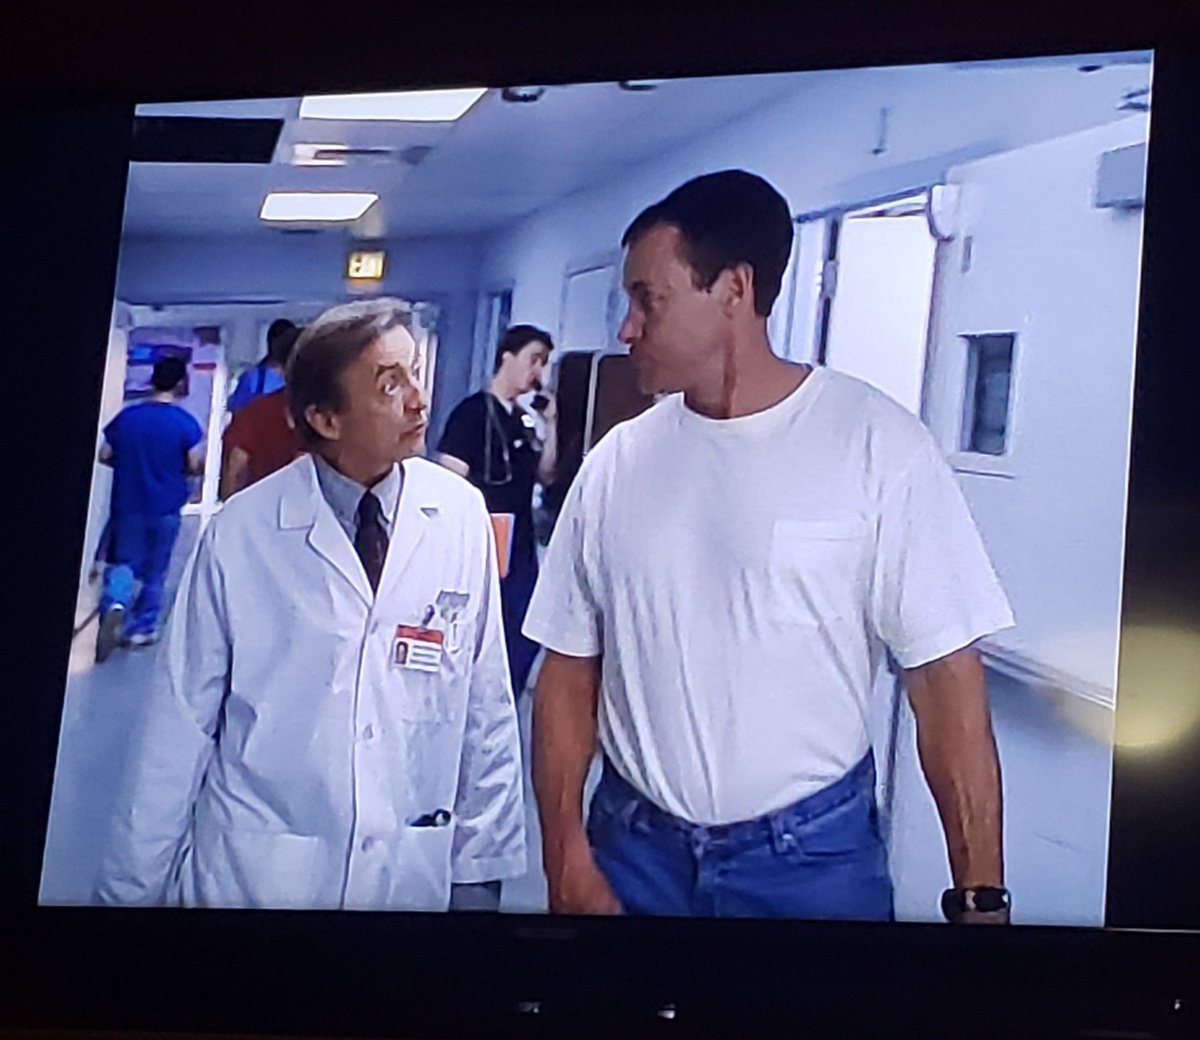 Can't help but notice Dr Kelso points out Dr Cox white shirt on season 1 of #Scrubs @bryandanielson #AEW White shirt is the way to go! @JohnCMcGinley #KenJenkins @GeenoEvel86